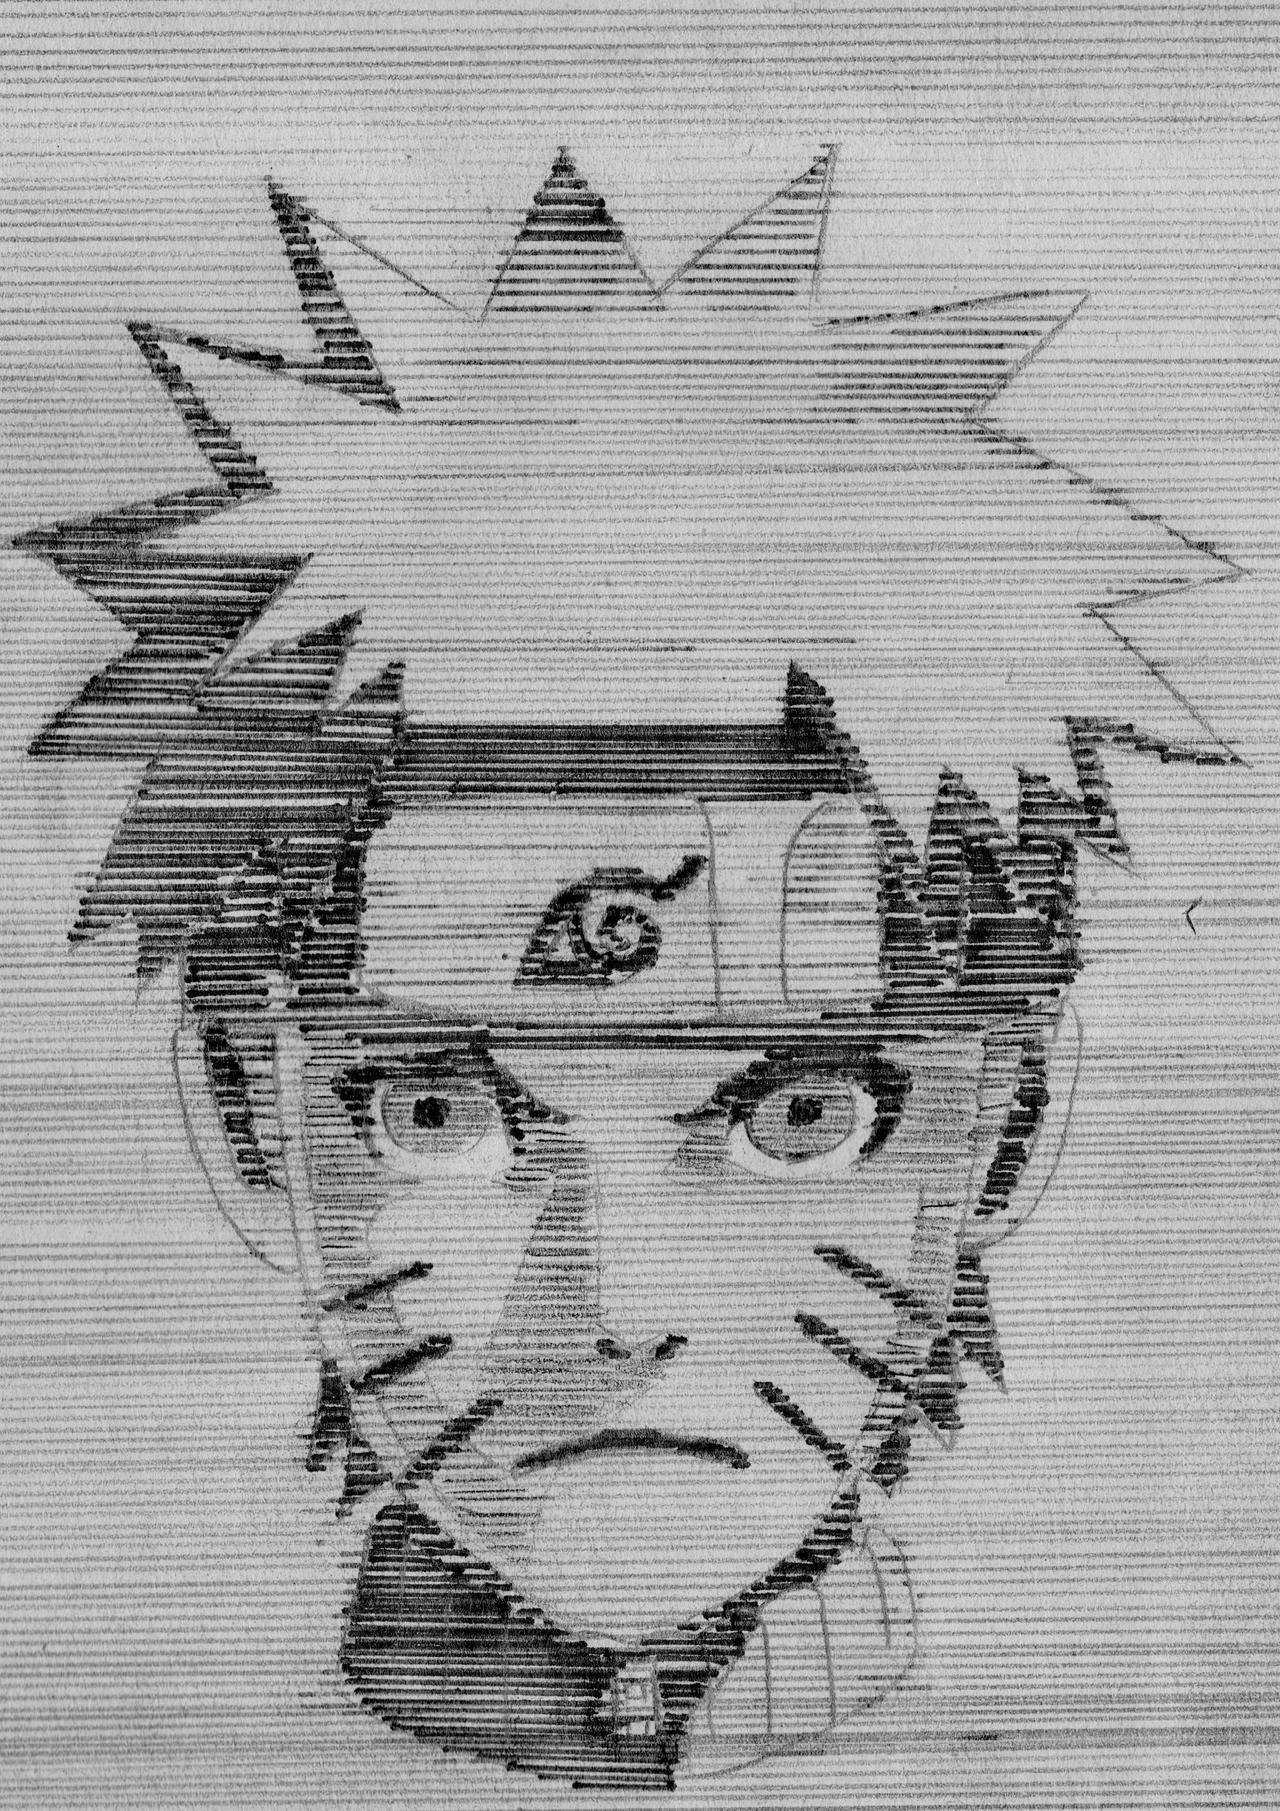 Drawing - Naruto Face — Steemit